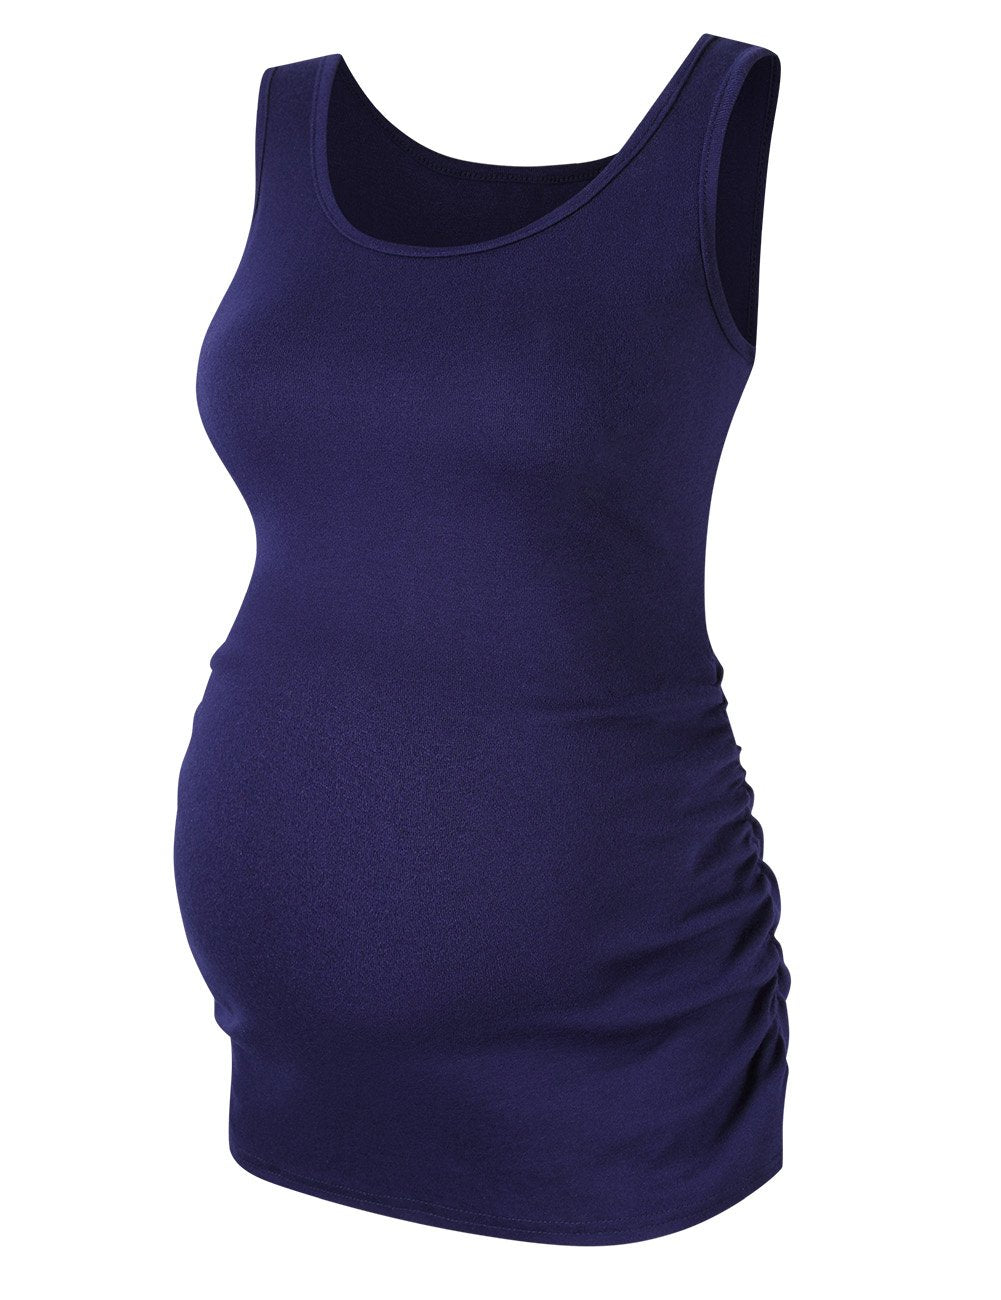 Maternity Basic Tank Top Neck Sleeveless Tops Pregnancy Solid Side Ruching Vest